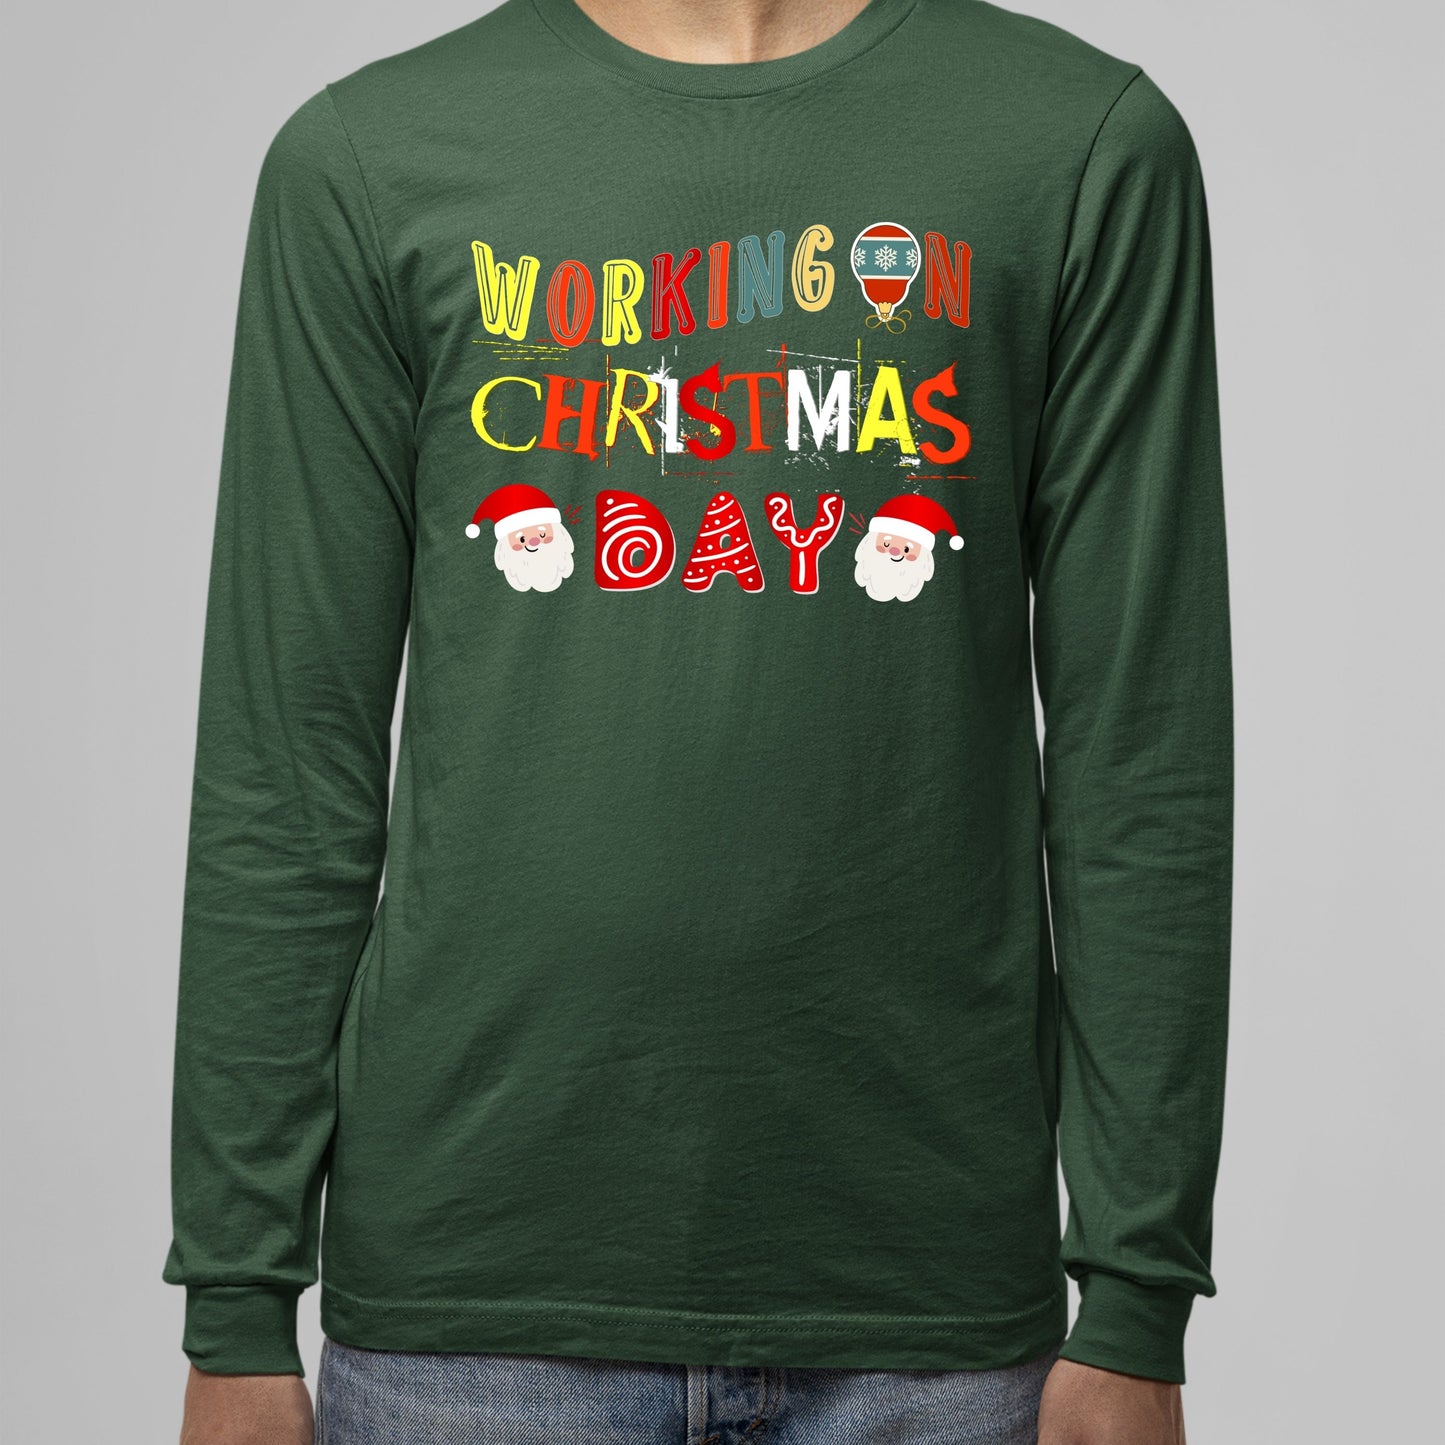 Working on Chirstmas day , Christmas Sweatshirt,  School TShirt, Christmas Shirt, Doctor Shirt, 2022 Christmas, Doctor Gift for Him,